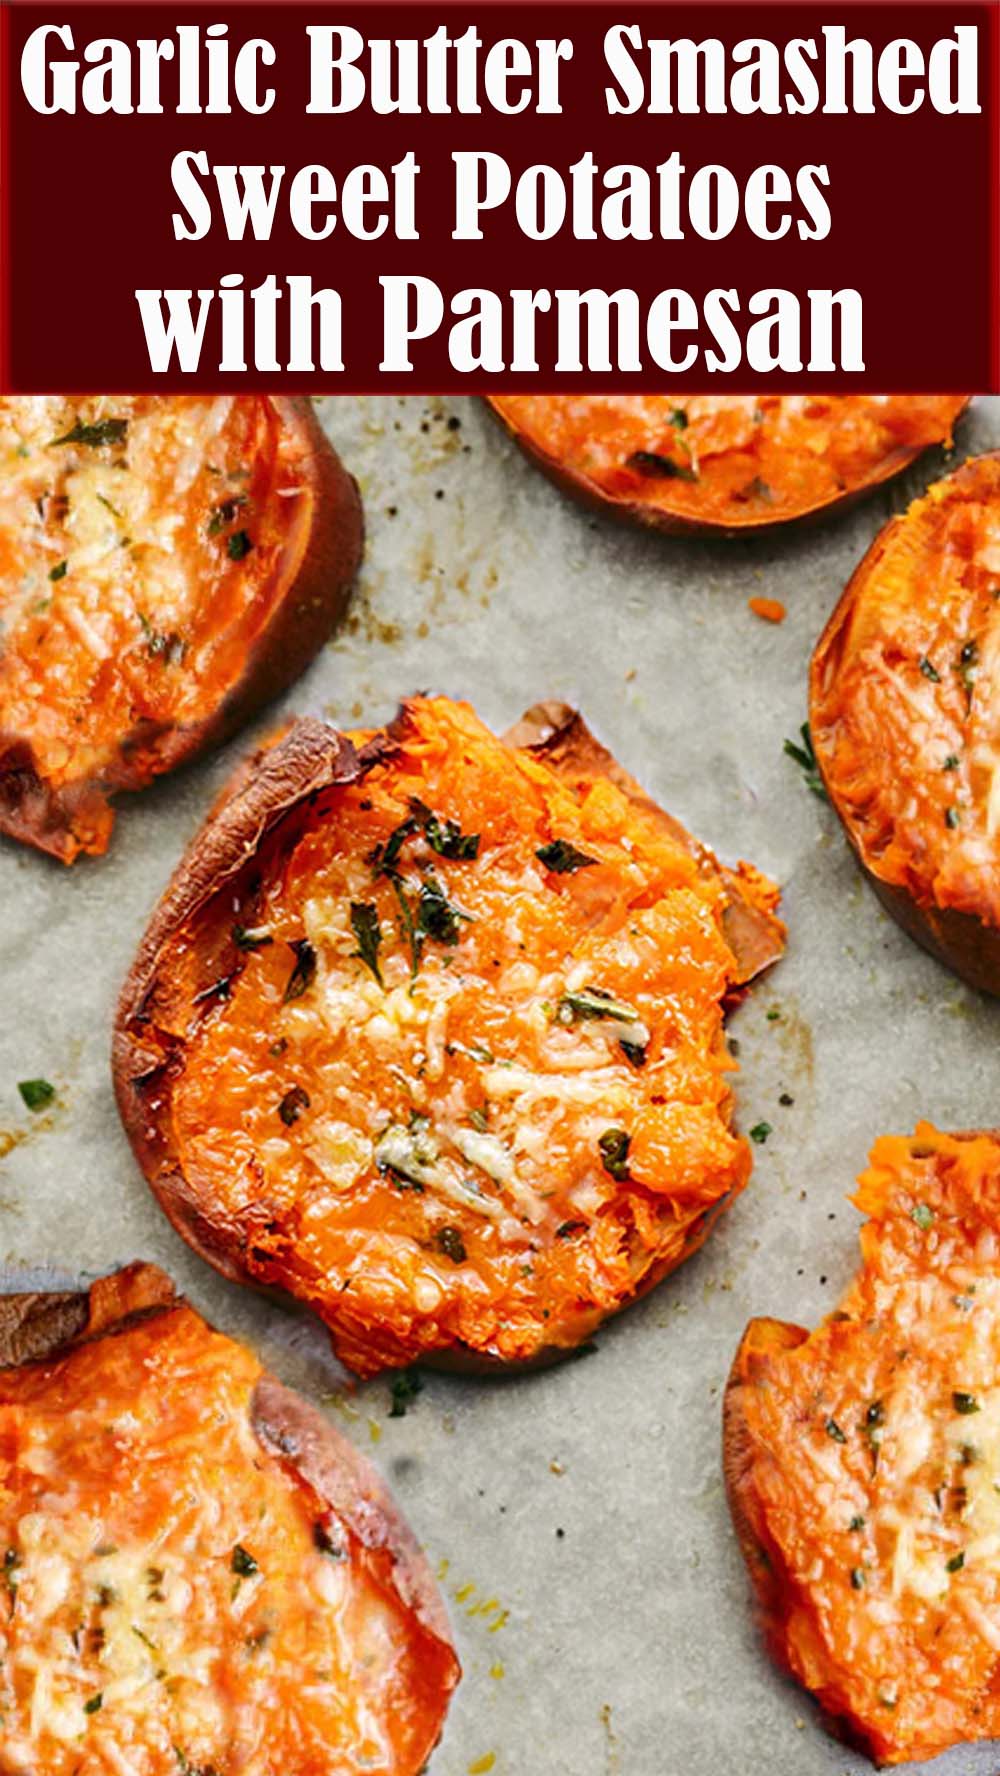 Garlic Butter Smashed Sweet Potatoes with Parmesan